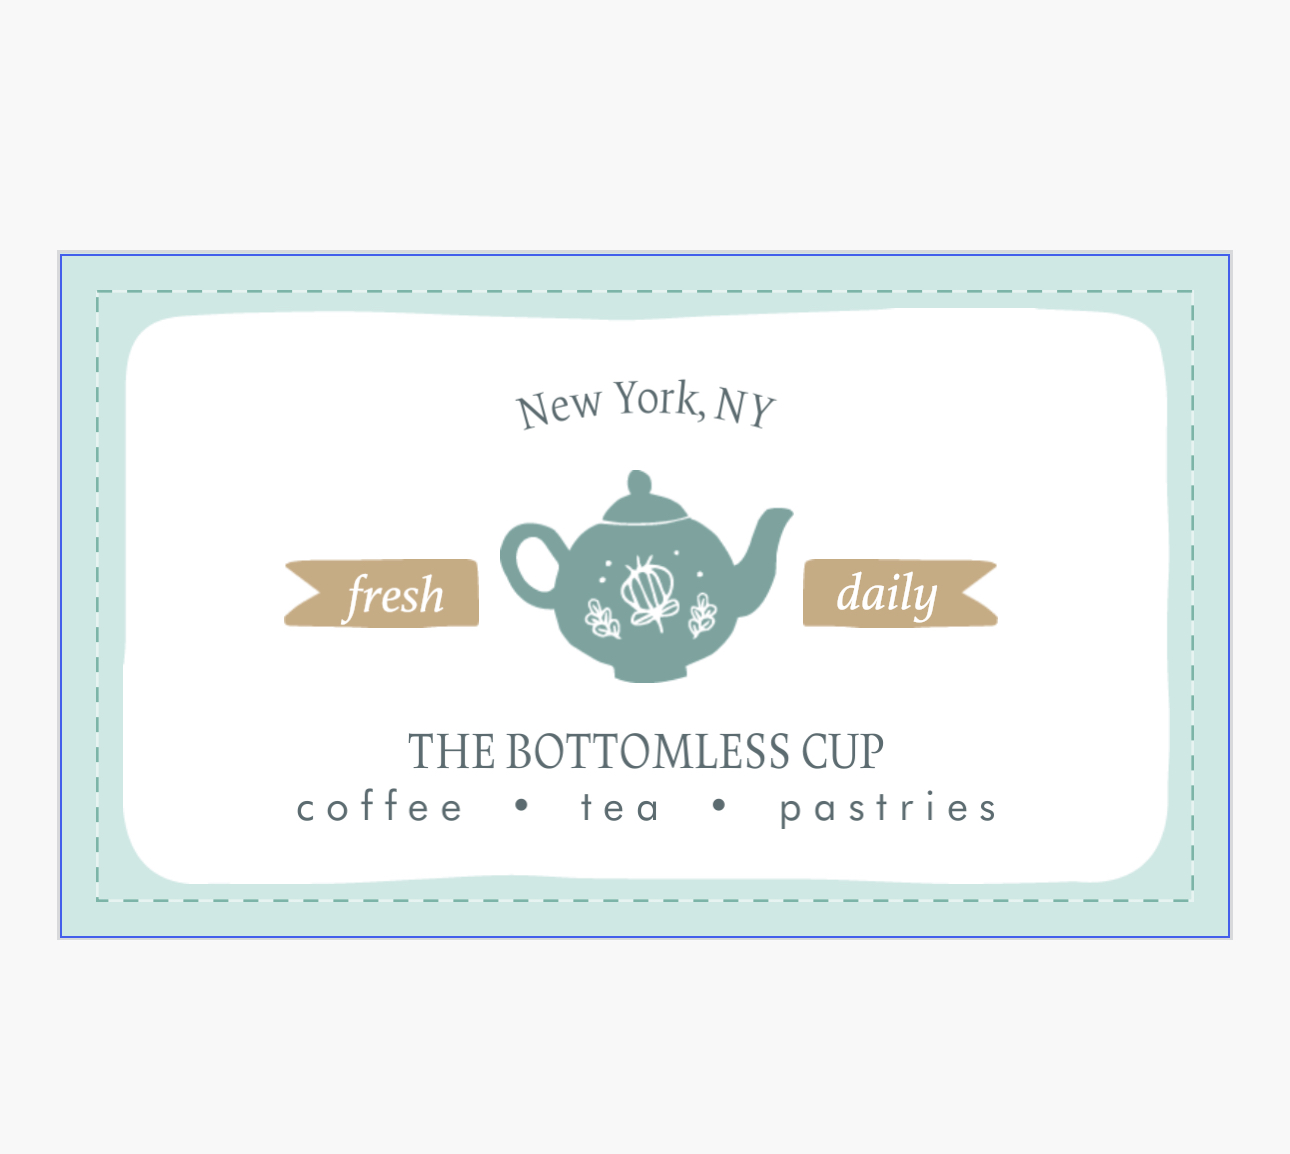 The Bottomless Cup